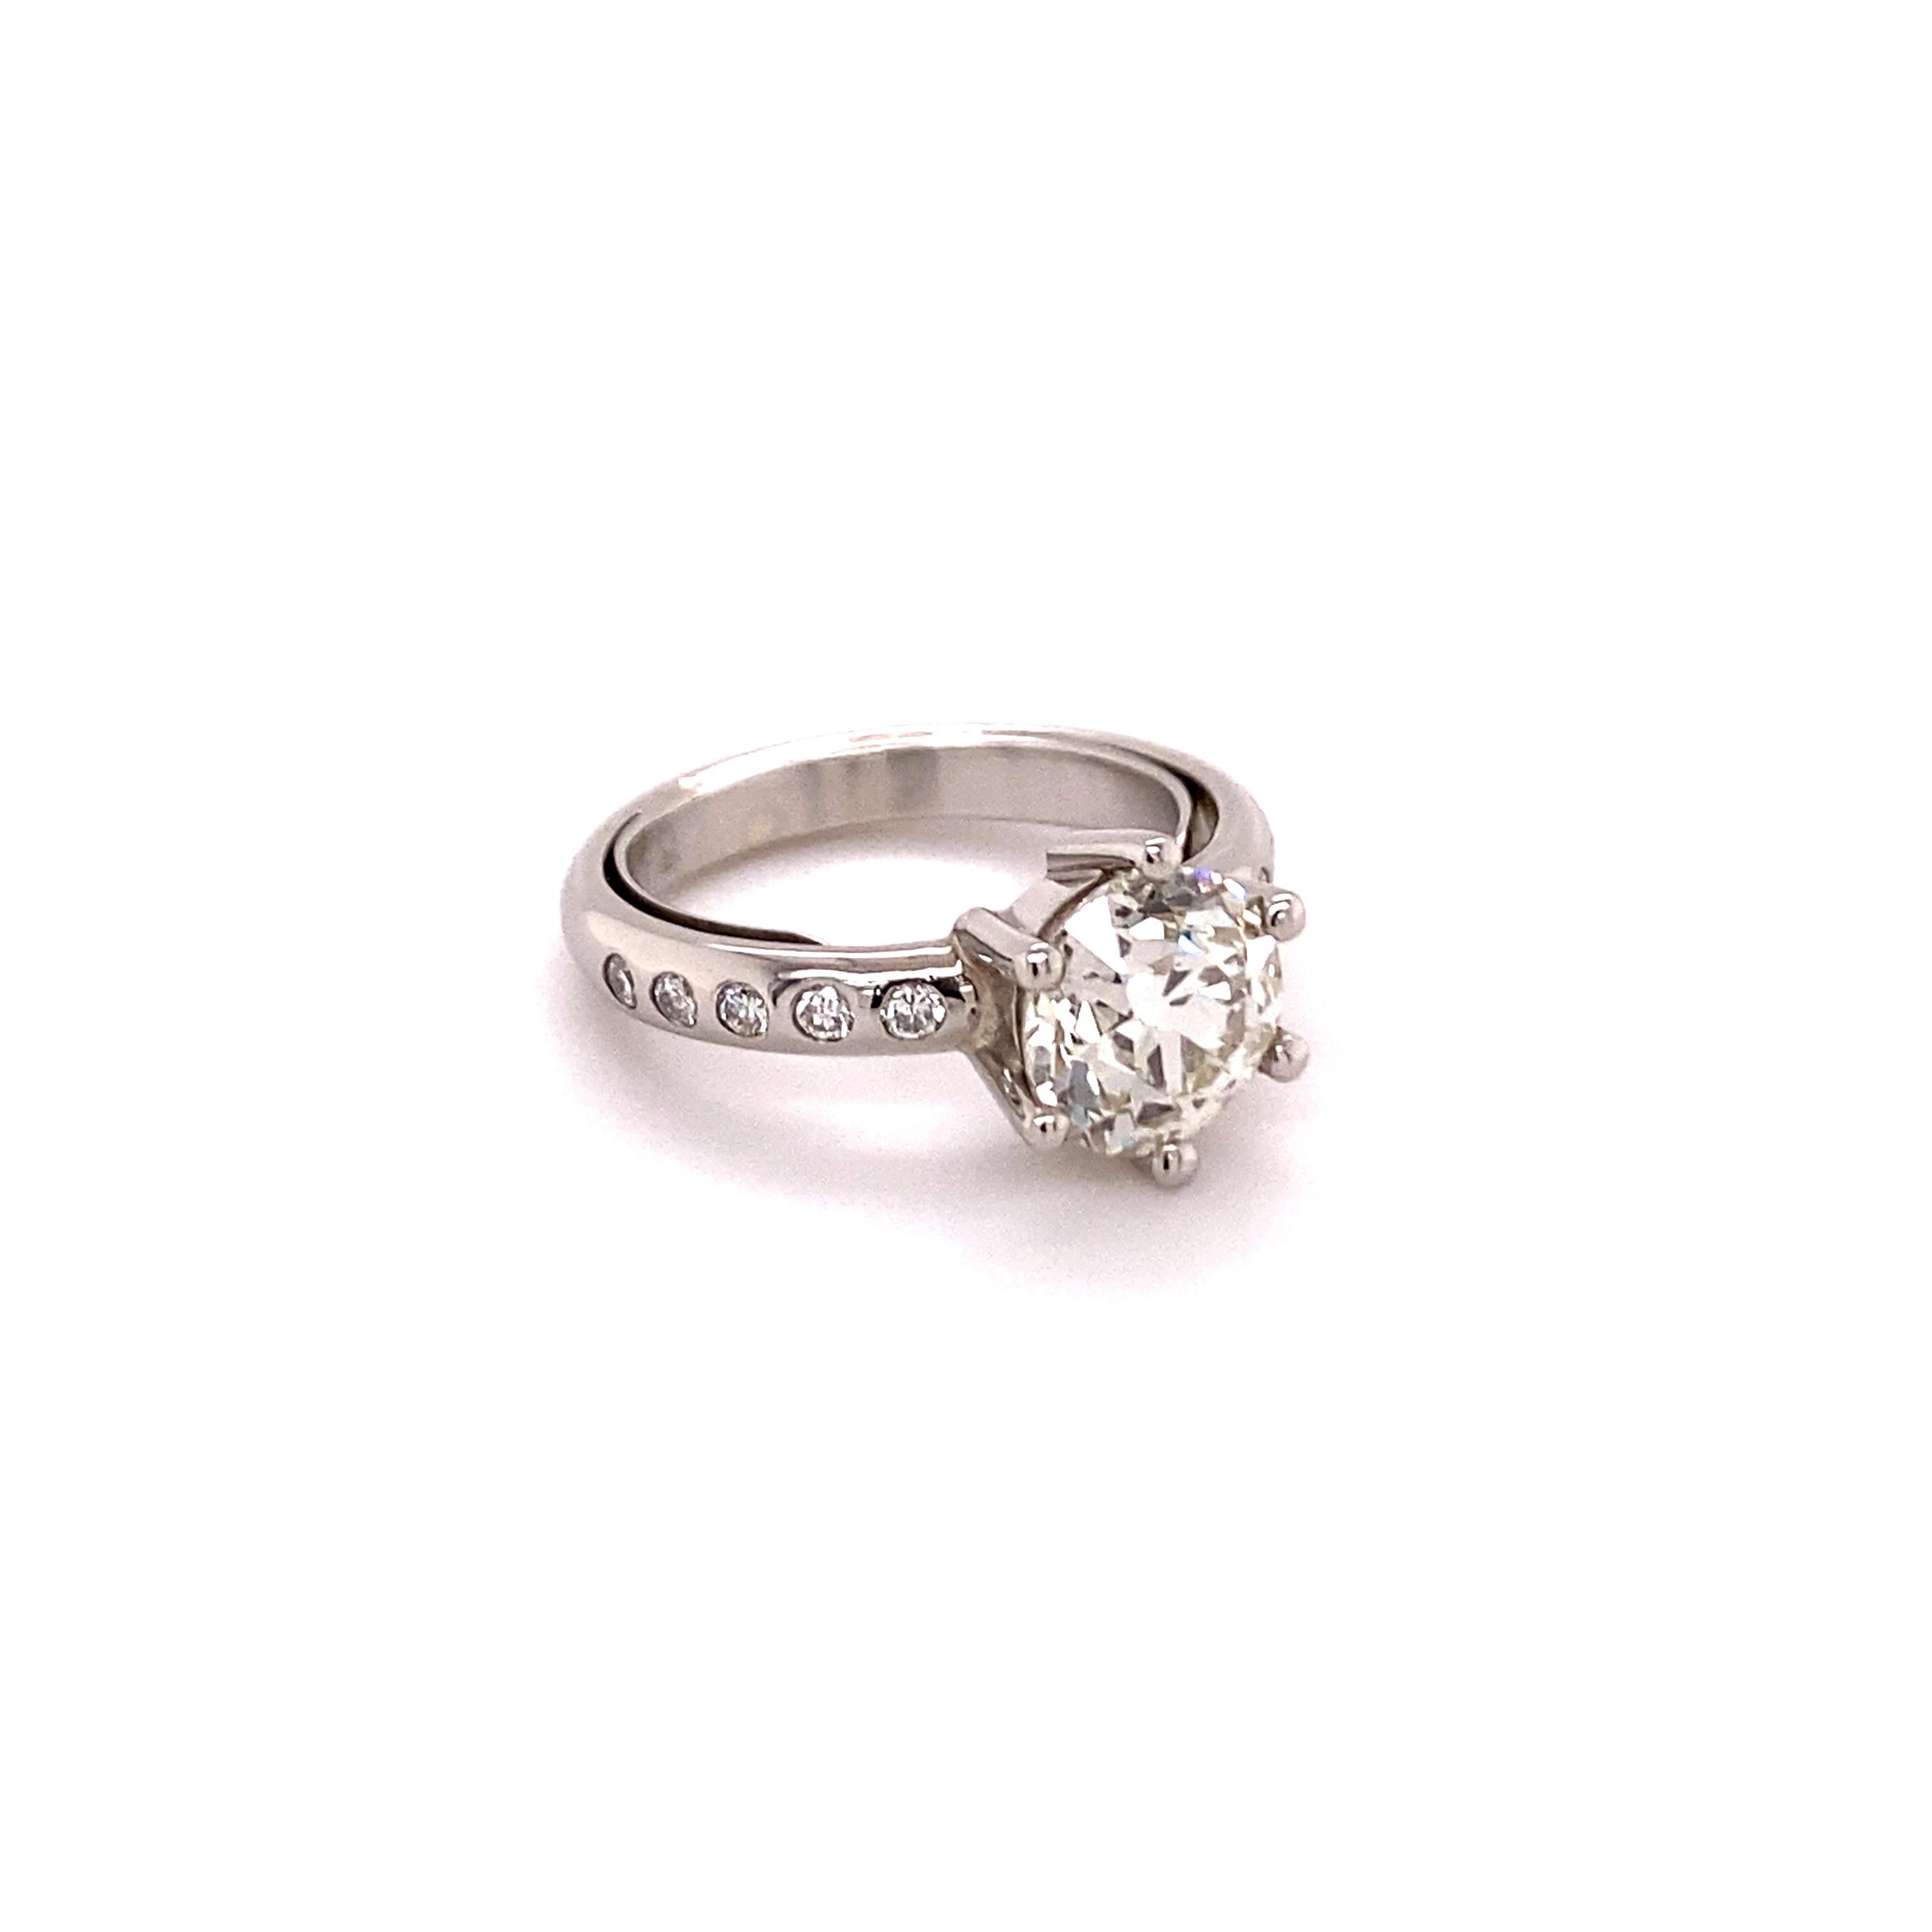 Modern ring manufactured in platinum 950. Set in six prongs with one old European-cut diamond of 1.70 ct. The diamond is of slightly tinted colour (J/K after GIA standards) and of si1 clarity. 

The shoulders of the shank are elegantly bezel set